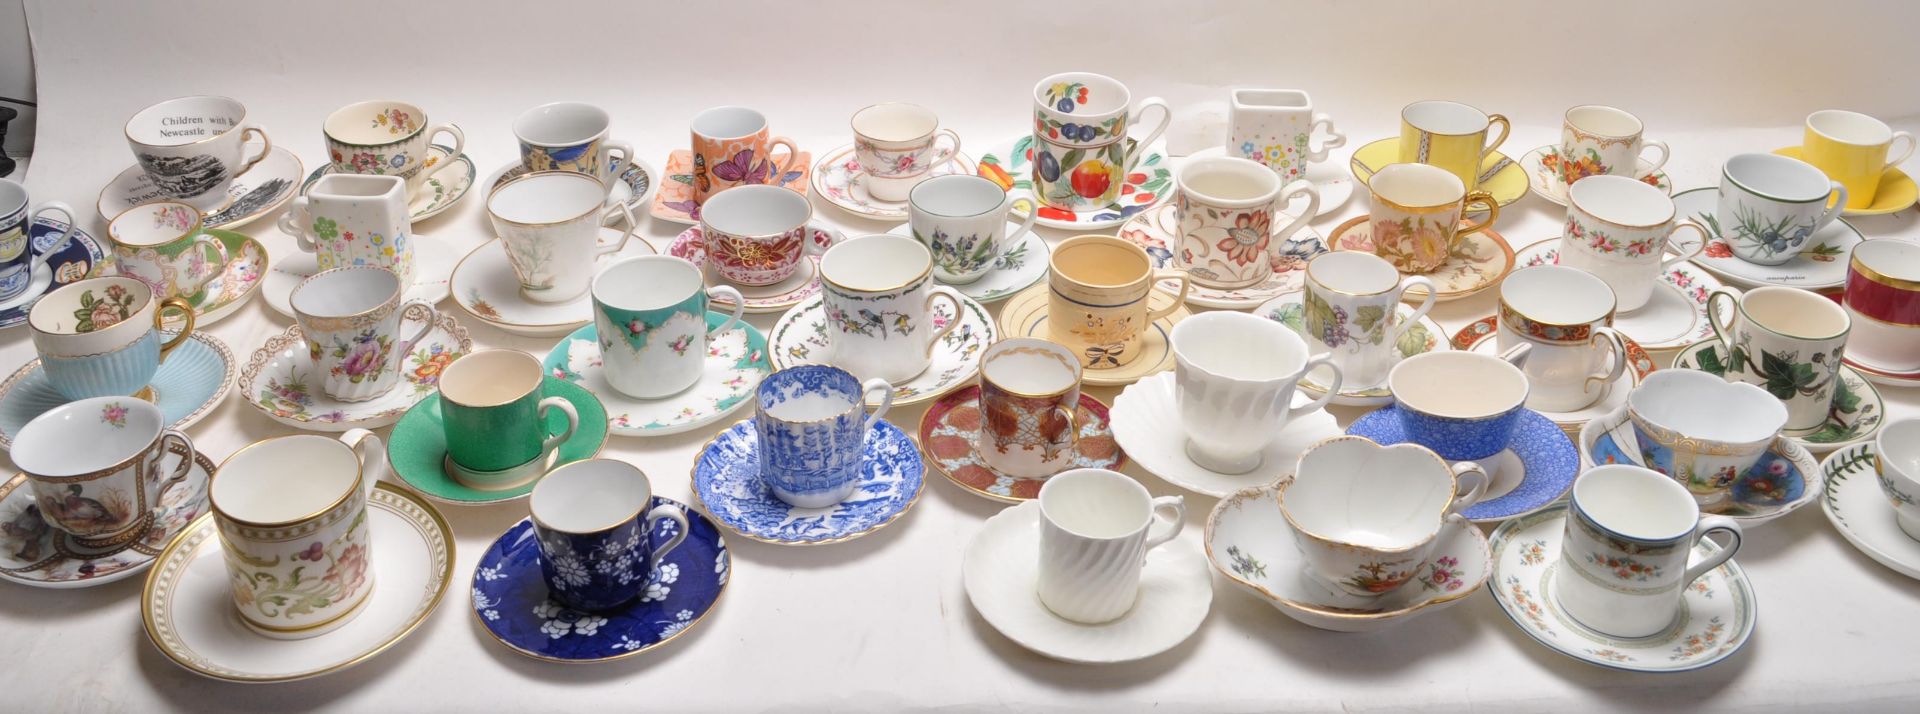 LARGE QUANTITY OF CERAMIC AND PORCELAIN CABINET CUPS AND SAUCERS